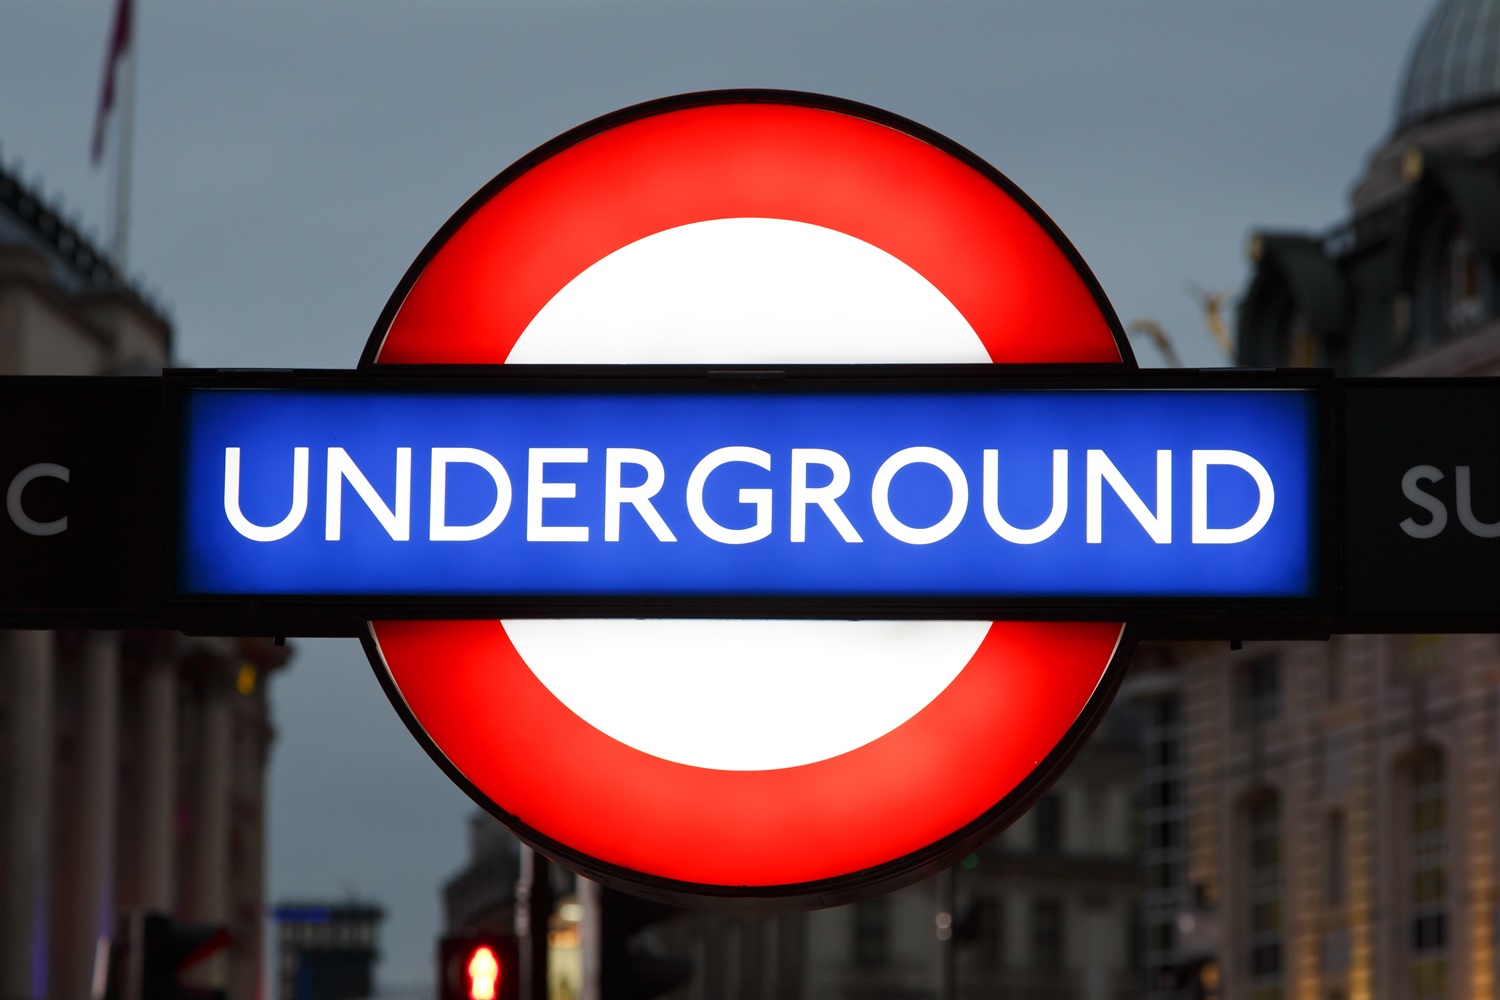 Night Overground services to extend to north London for first time